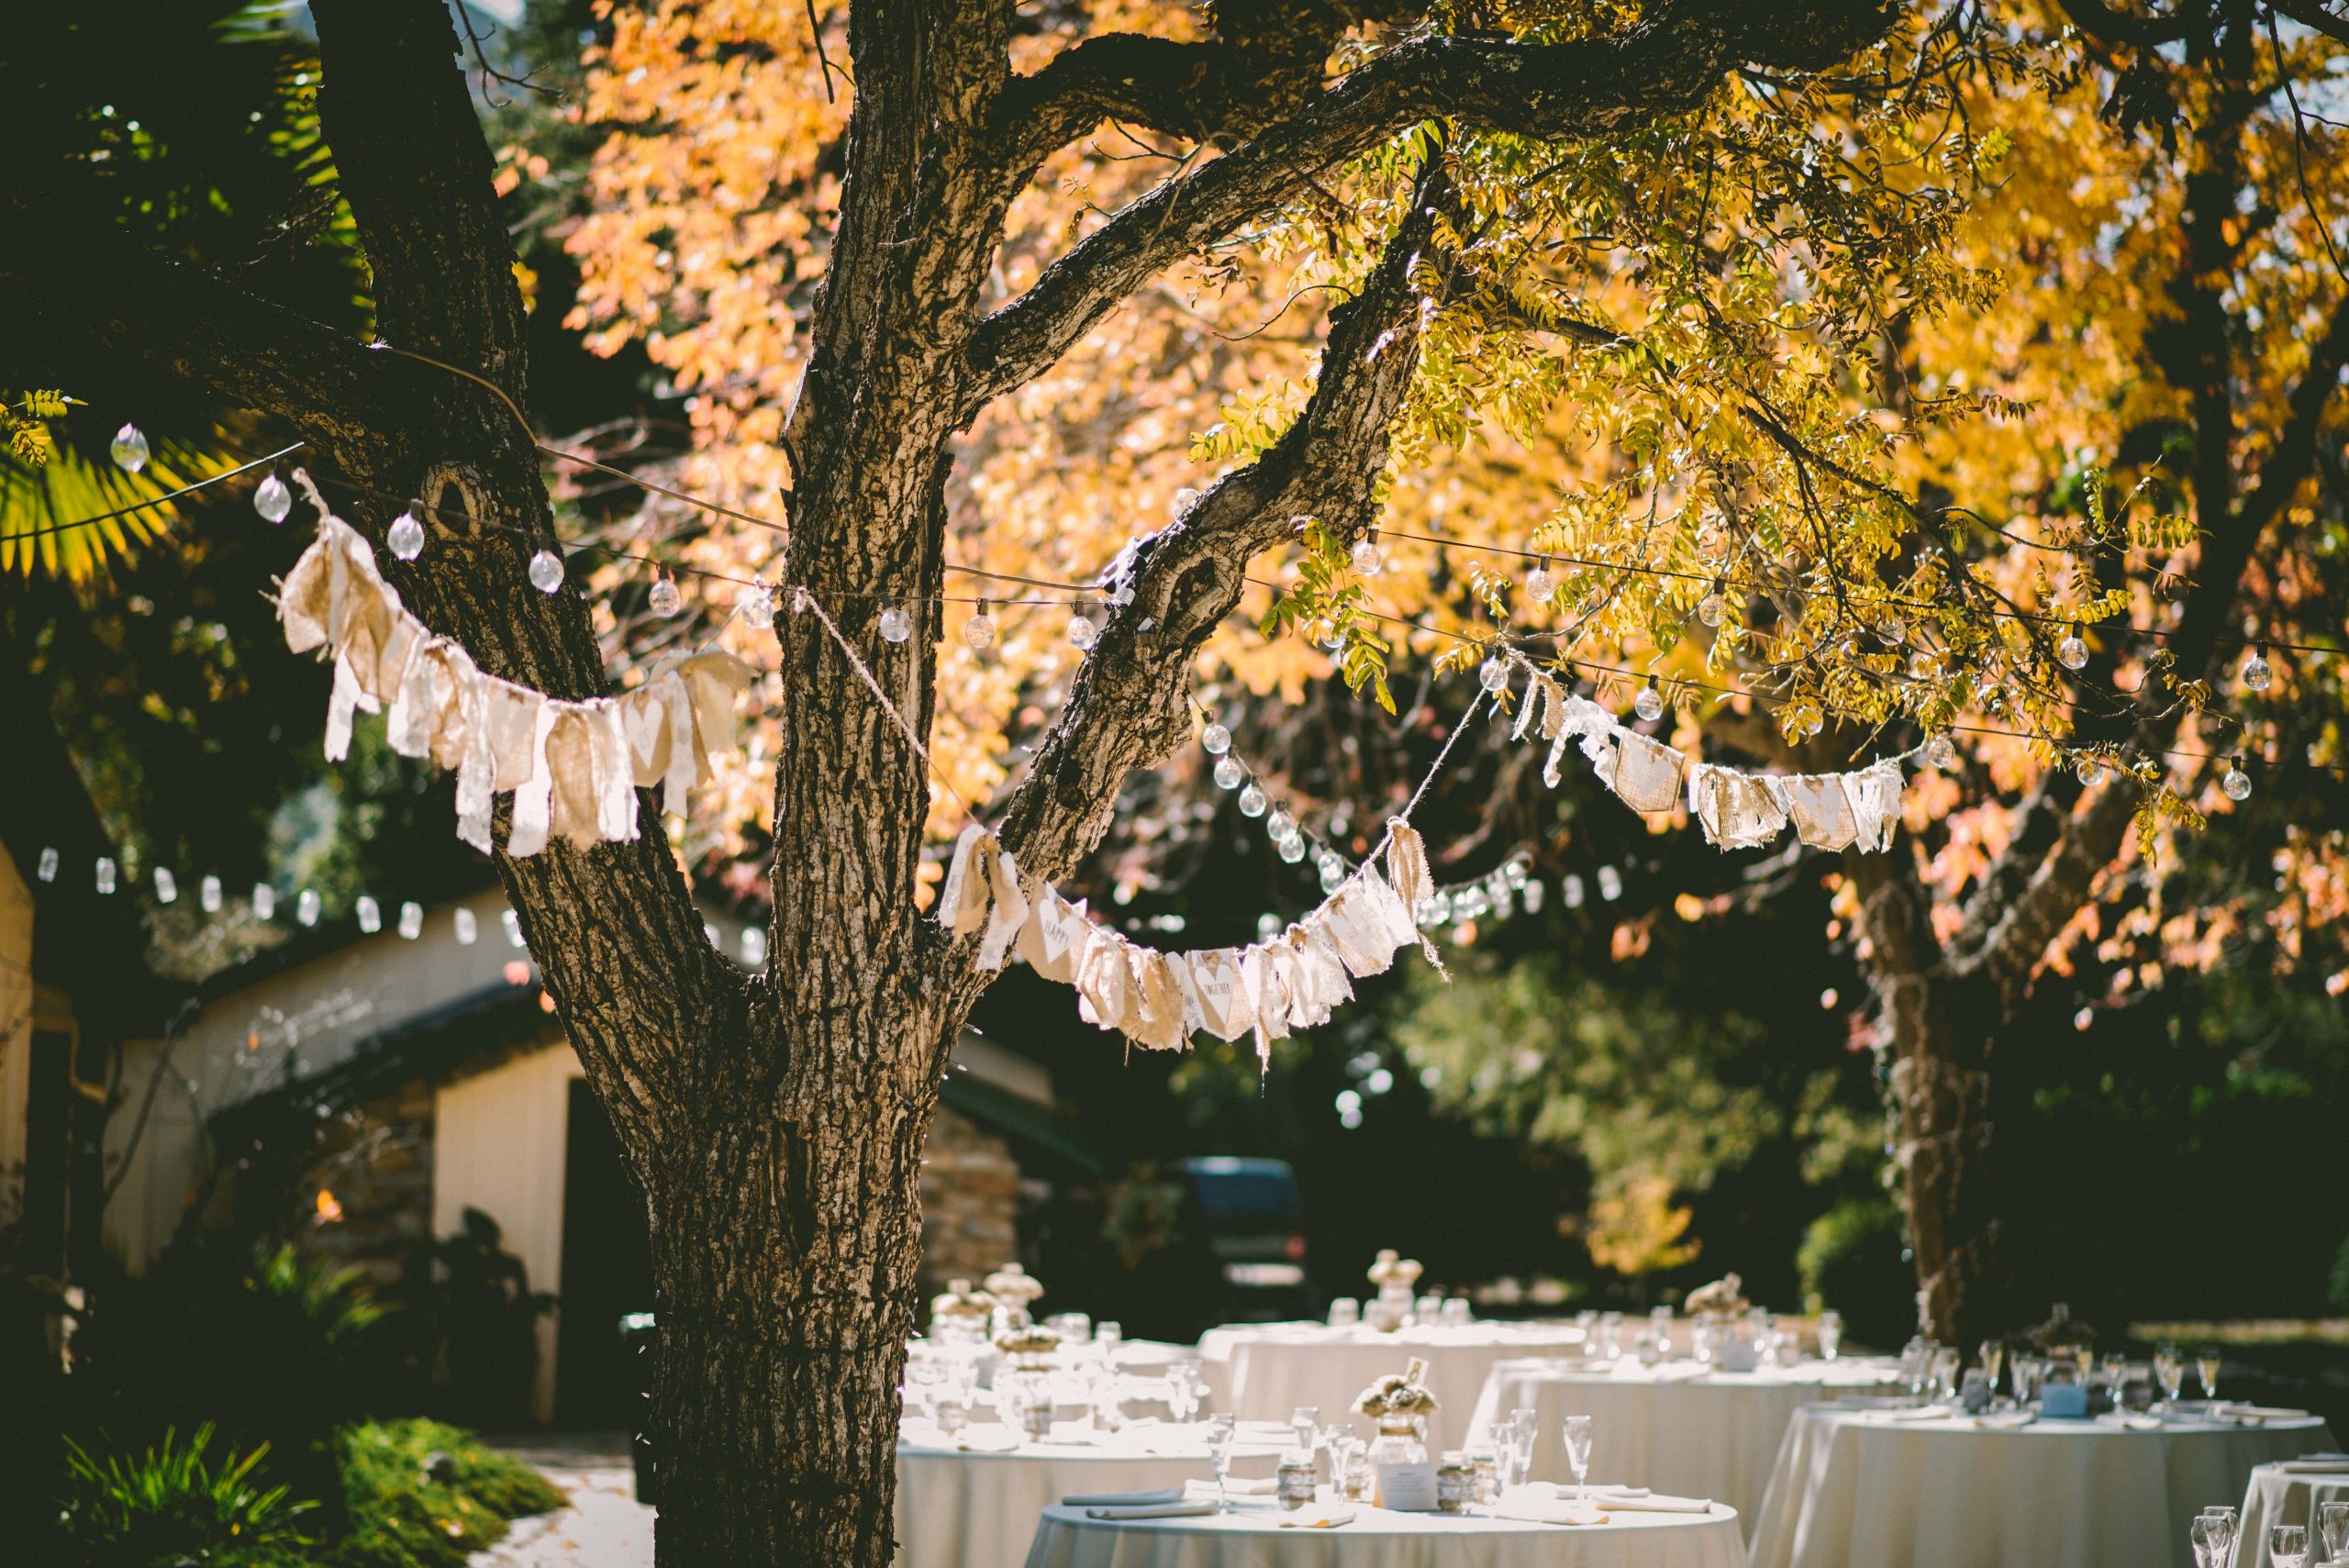 Backyard wedding with hanging lights above tables decorated for a wedding reception.